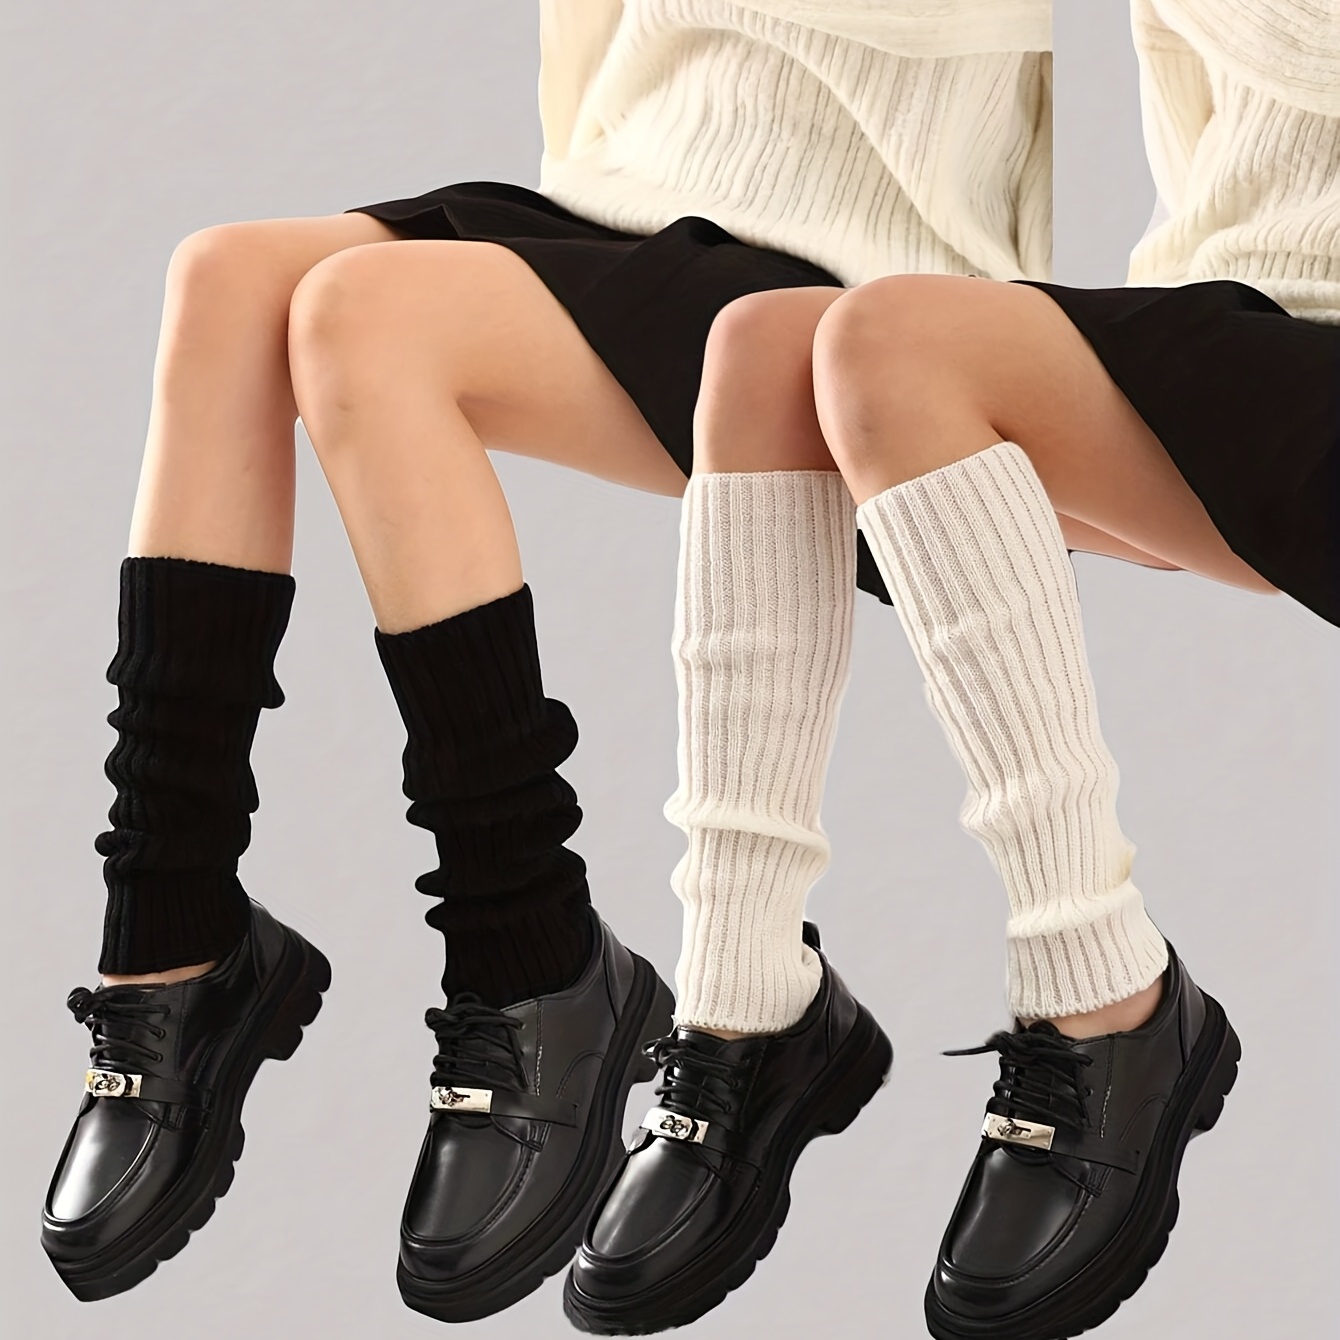 Women's Knitted Leg Warmer Ribbed Boots Socks with Zipper Y2K Over Knee  Foot Covers Fashion Womens Leg Warmers Set